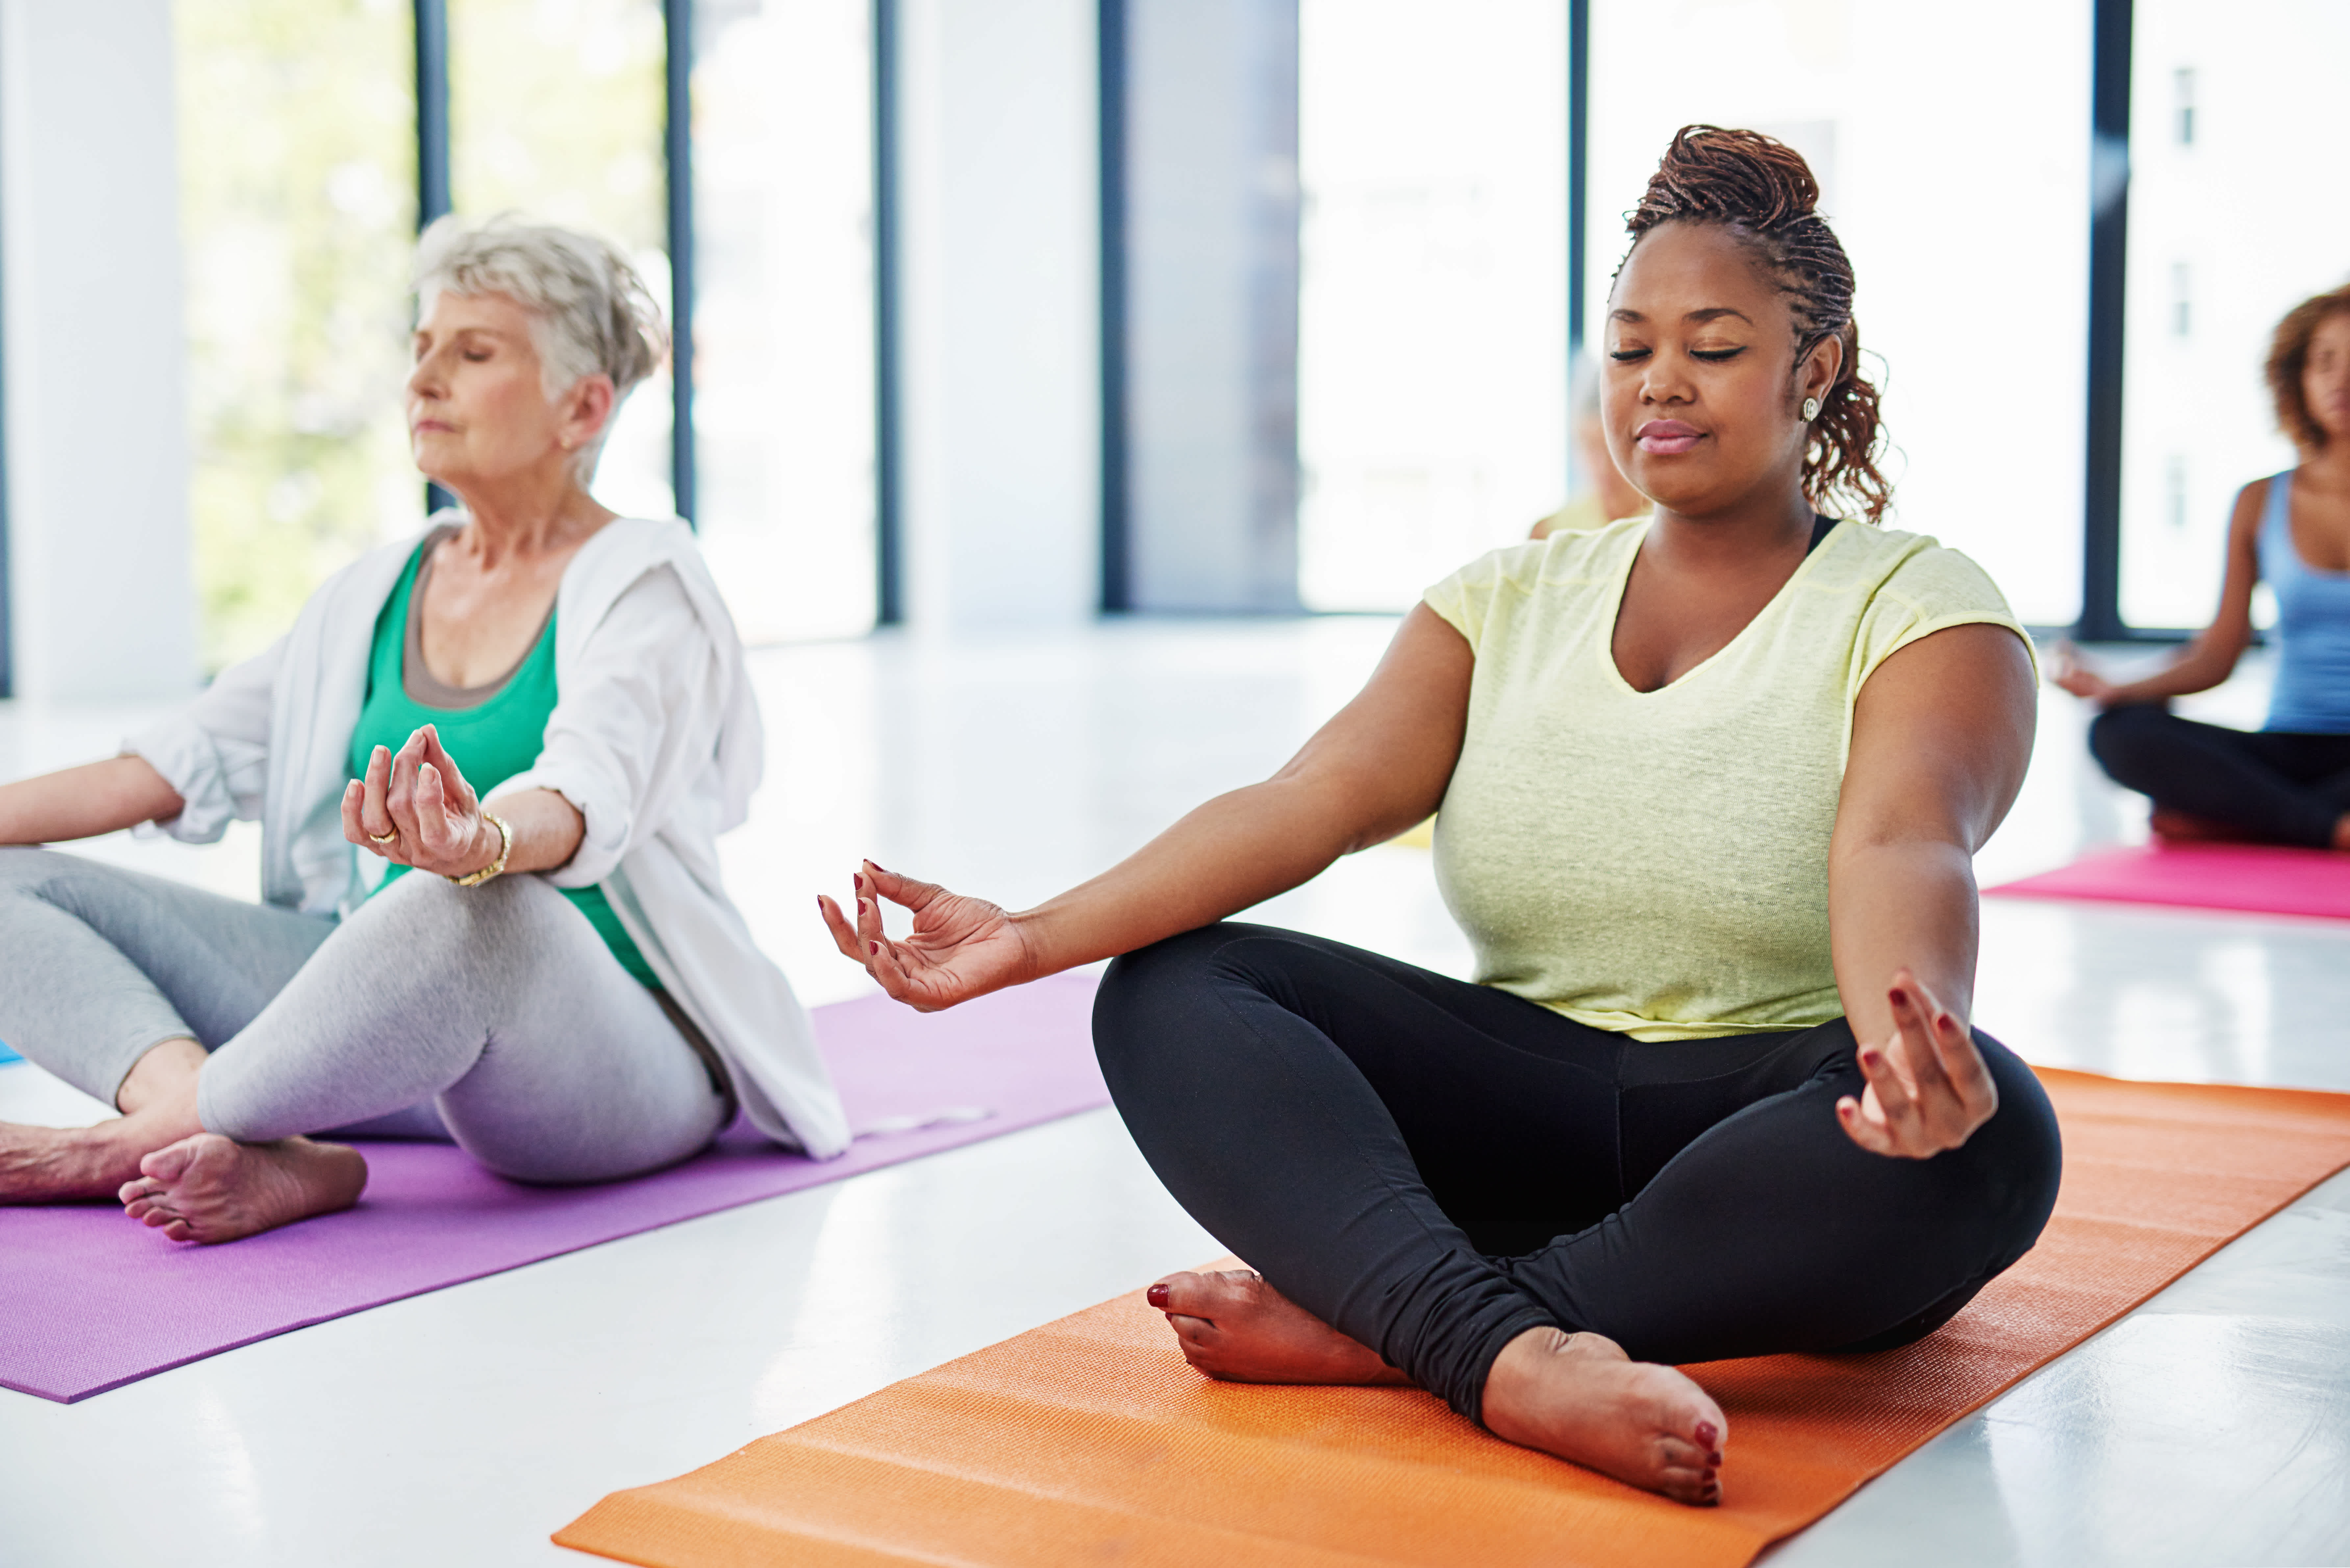 Two women meditating with their eyes closed and sitting cross-legged on yoga mats.